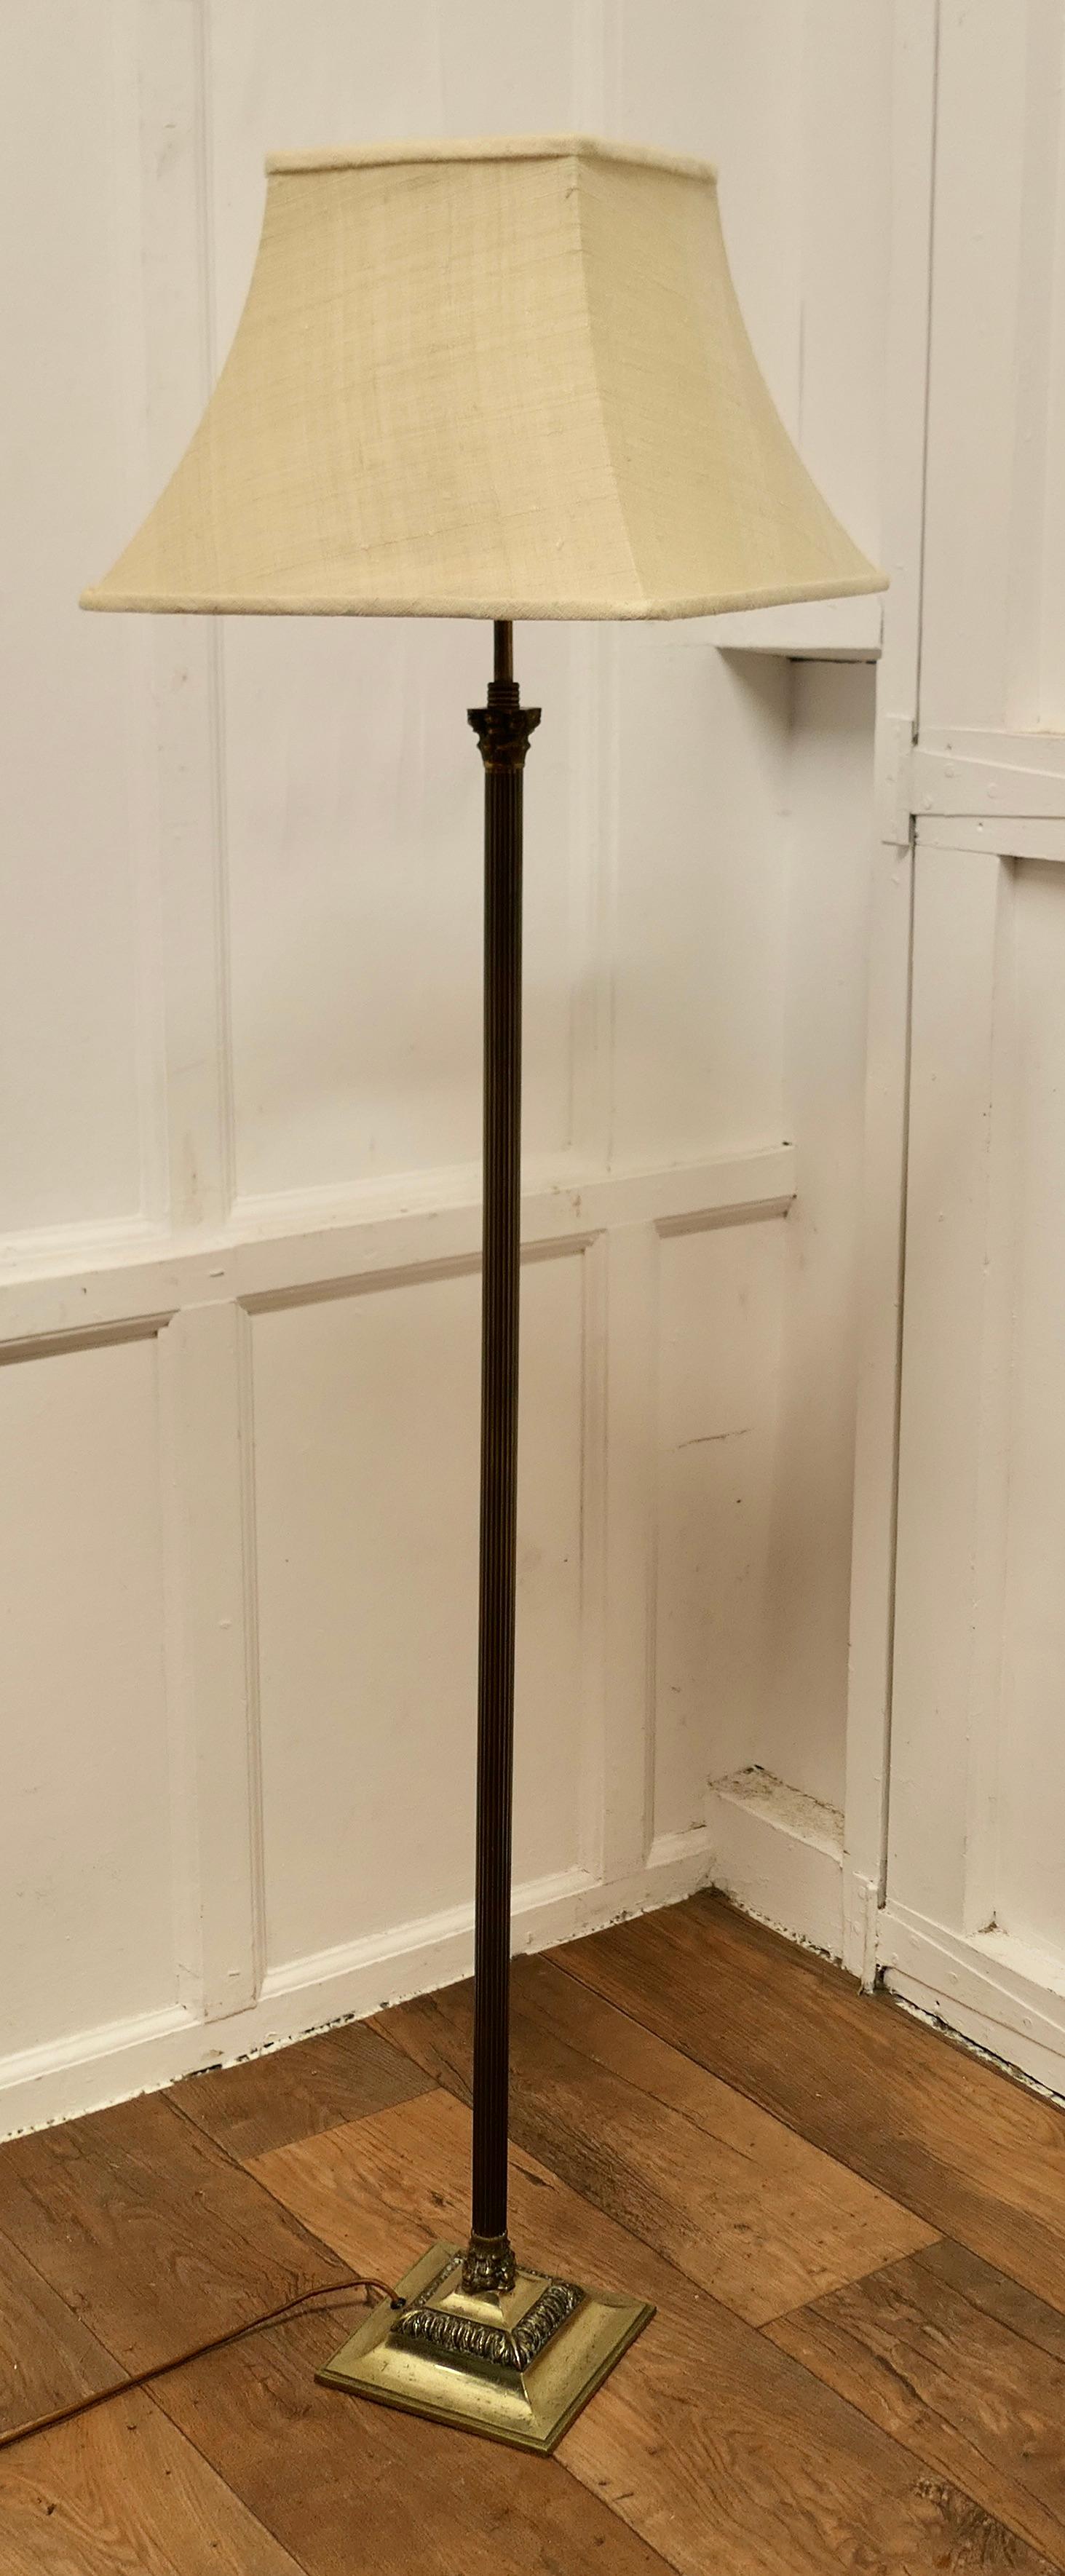 Early 20th Century Dainty Cottage Brass Arts and Crafts Floor Lamp     